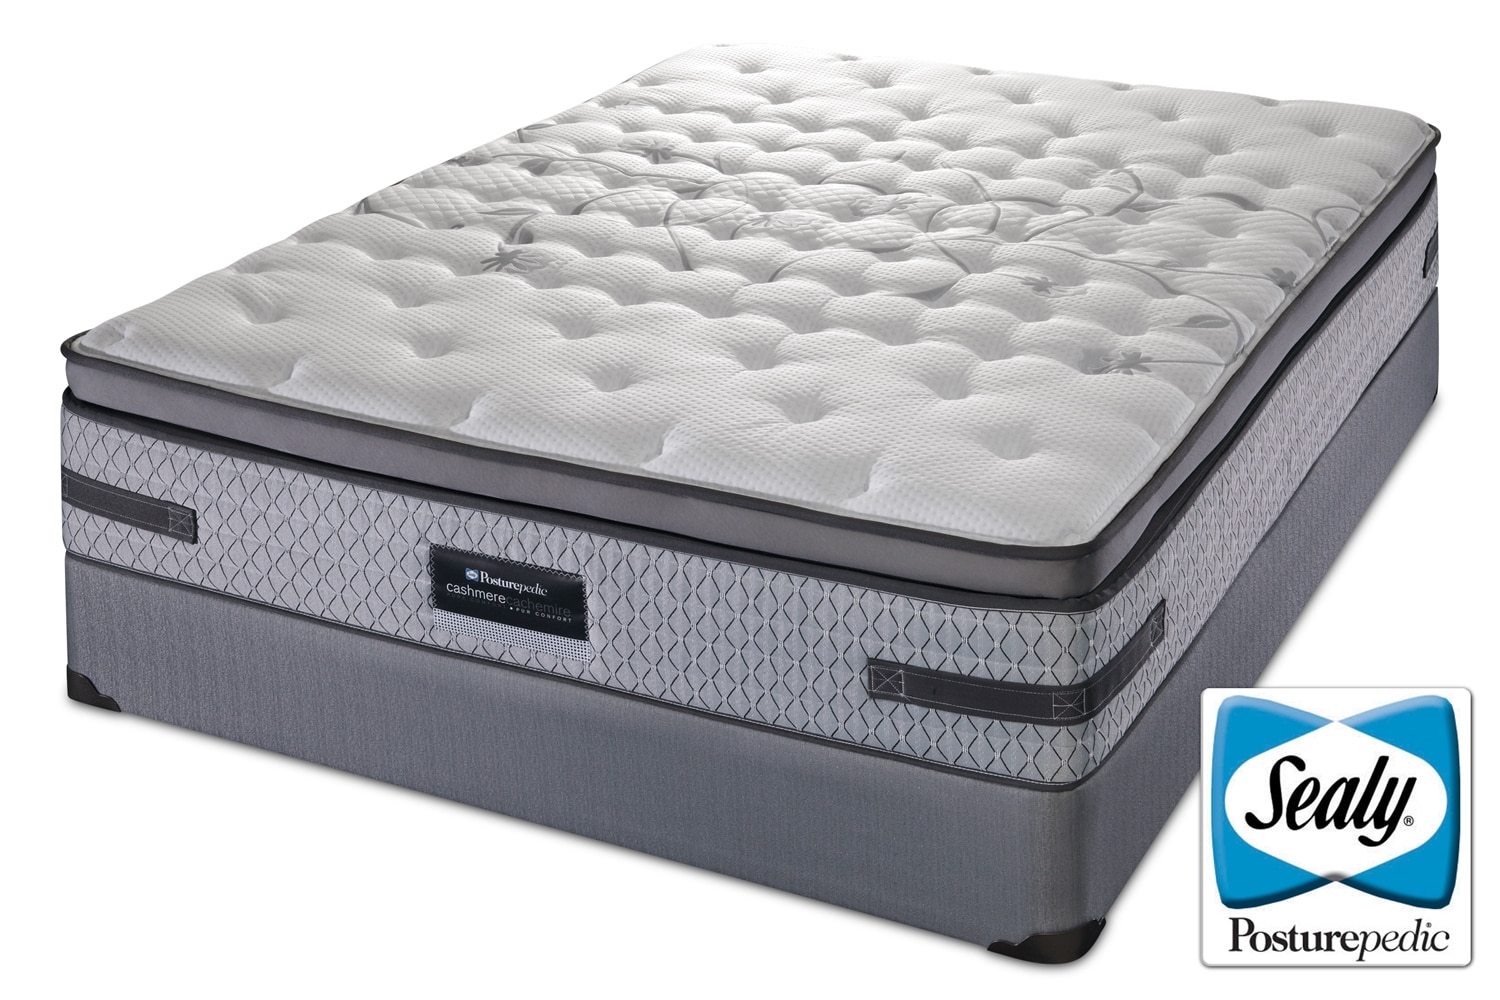 Can You Use A Queen Mattress On A Full Box Spring